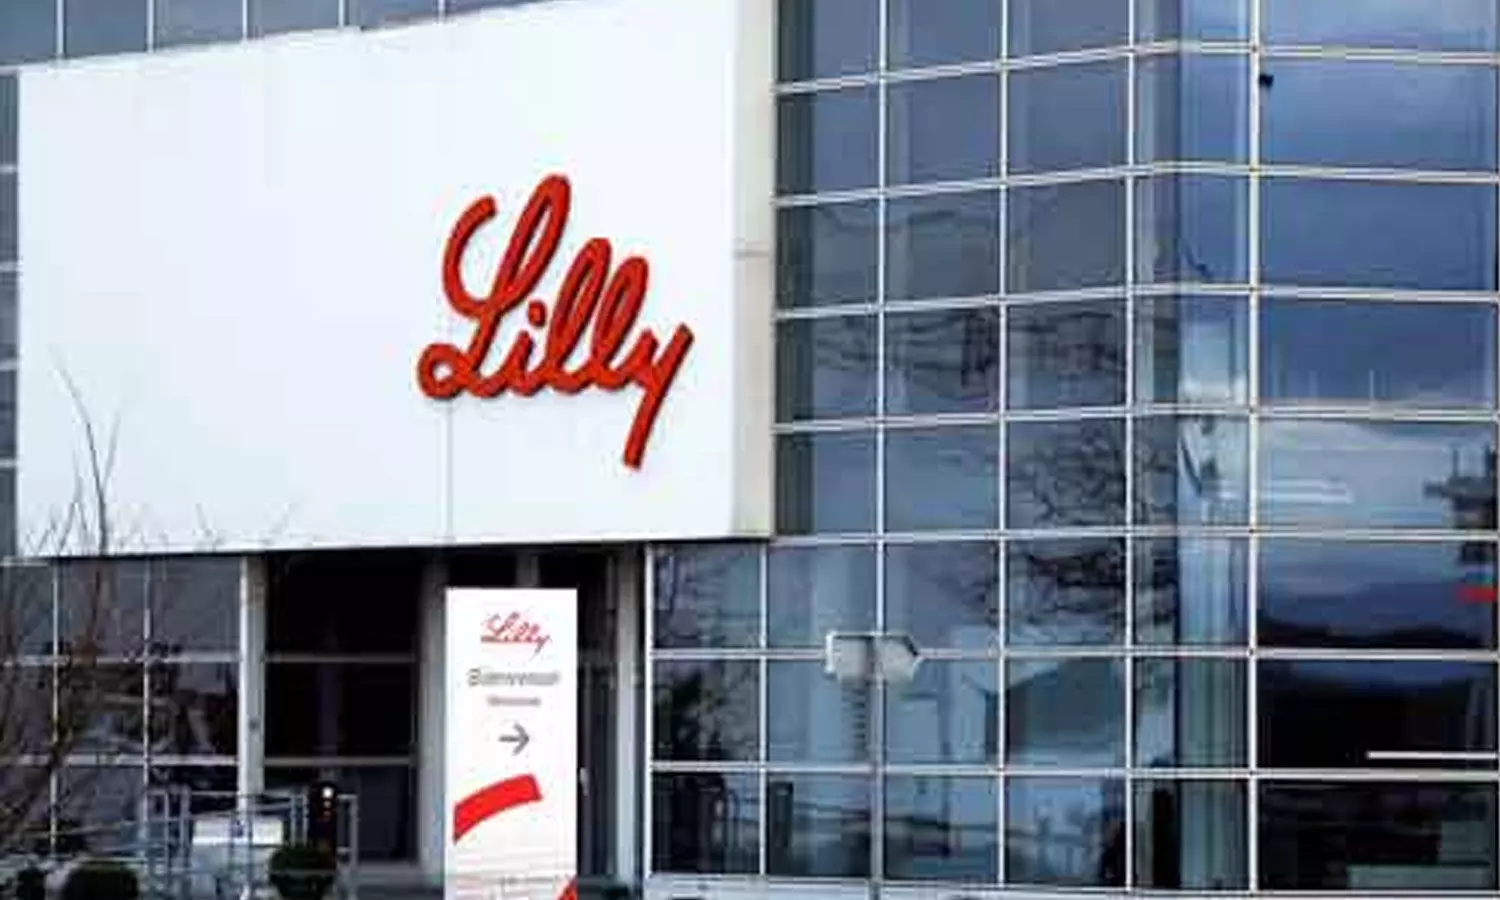 Lilly Partners with Canadian Pharma Company for therapies for multiple neurologic conditions